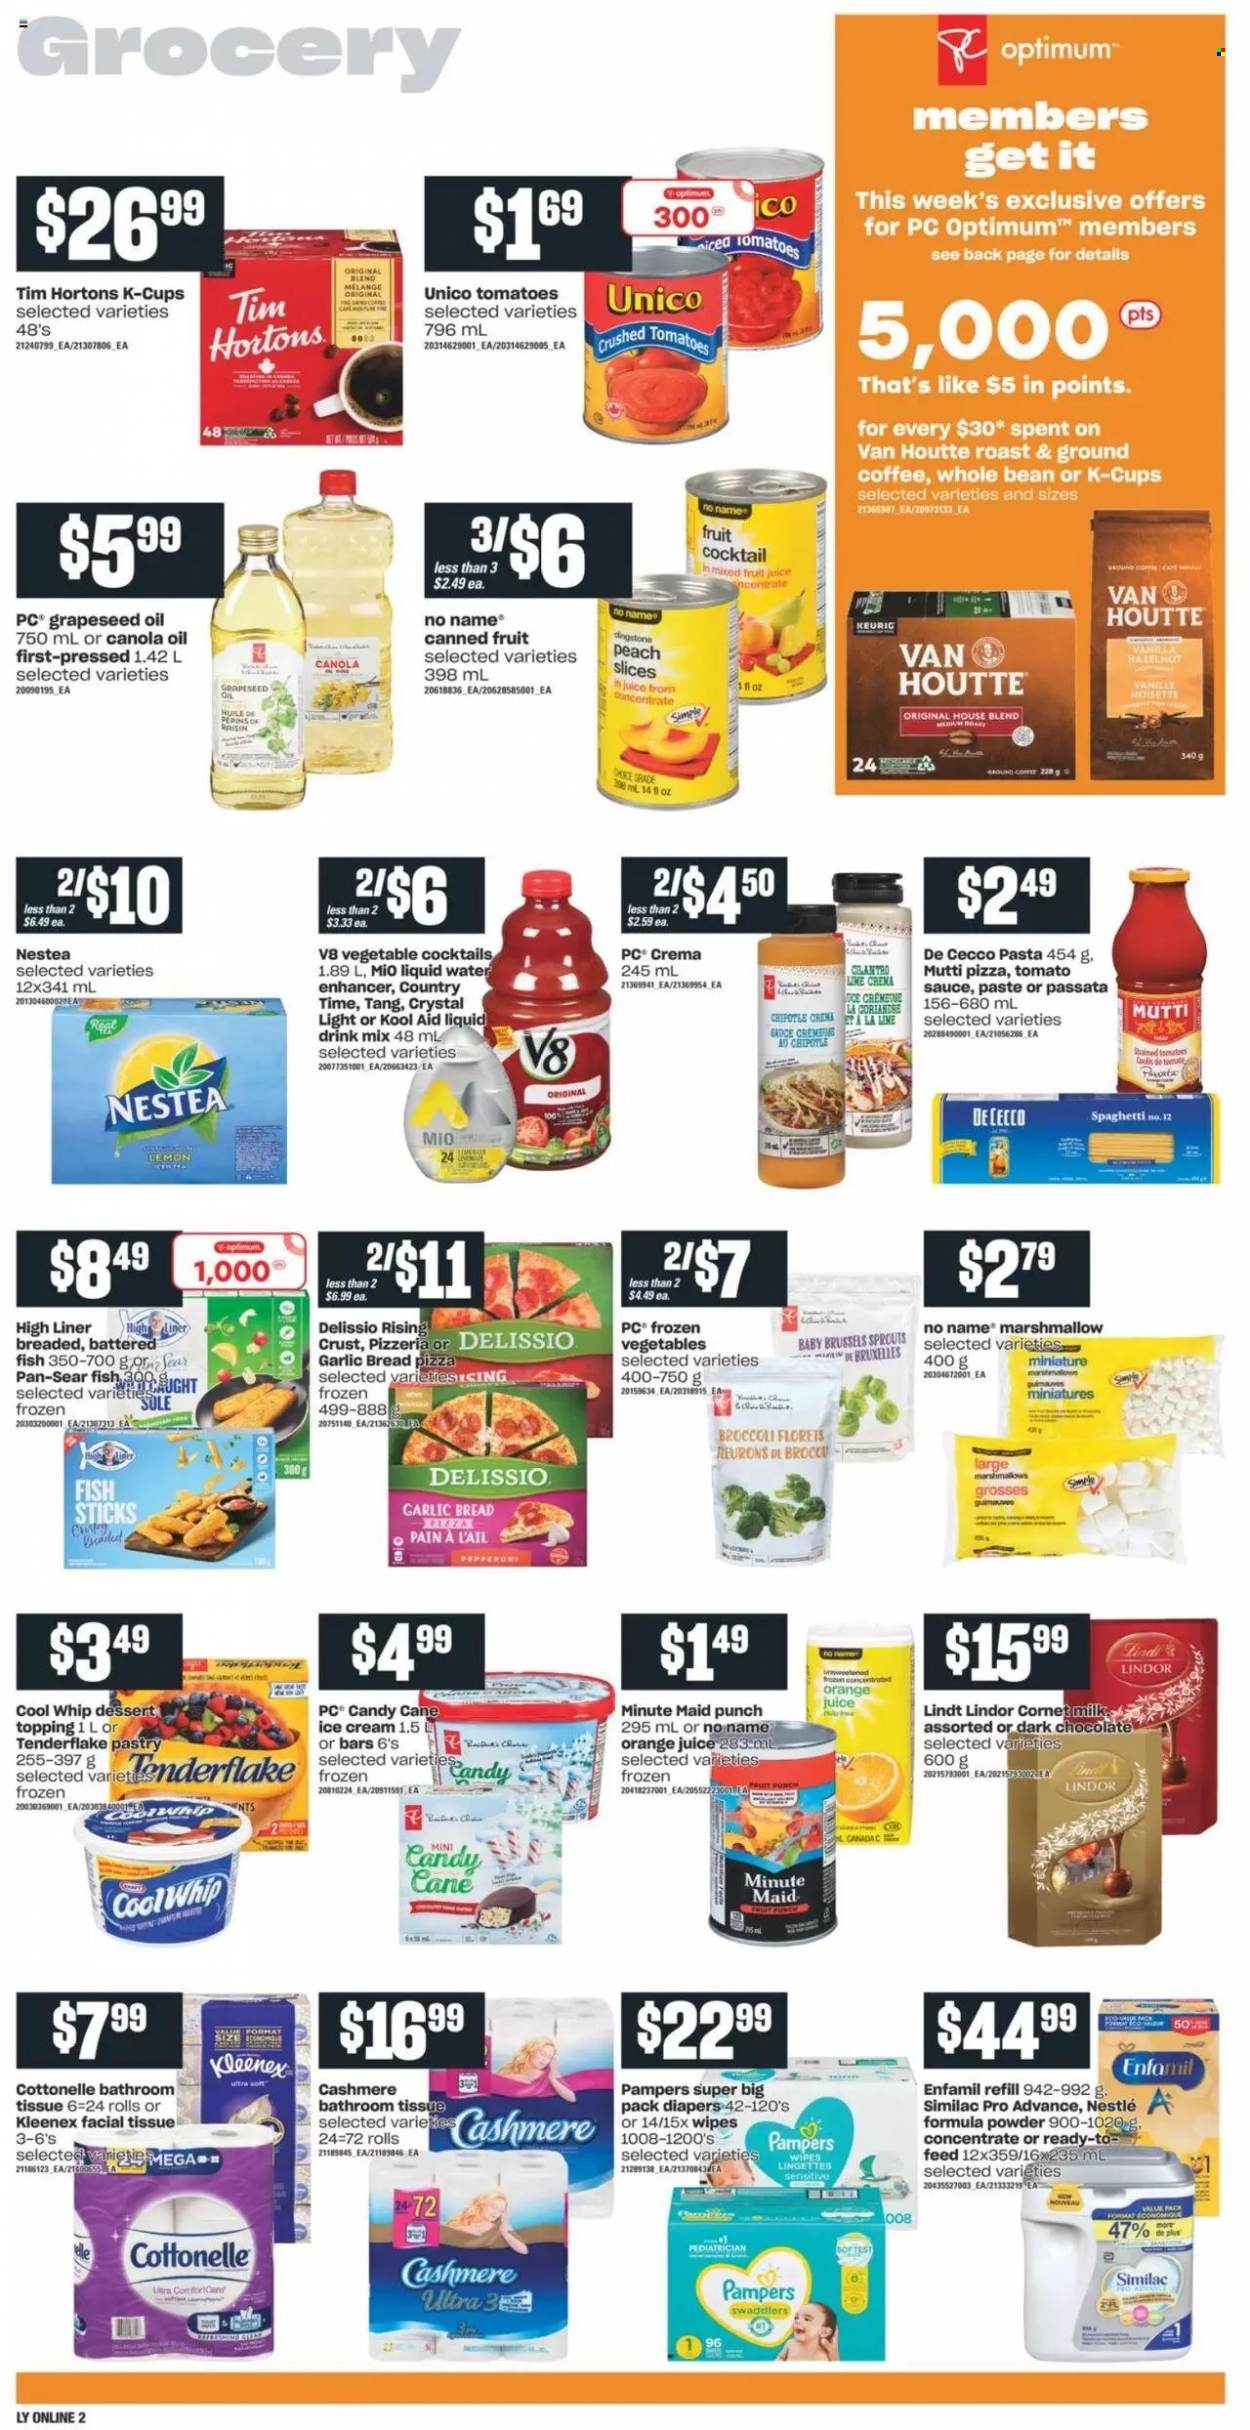 thumbnail - Independent Flyer - November 25, 2021 - December 01, 2021 - Sales products - bread, broccoli, brussel sprouts, fish, fish fingers, No Name, fish sticks, spaghetti, pizza, pasta, pepperoni, Cool Whip, ice cream, frozen vegetables, marshmallows, candy cane, topping, crushed tomatoes, tomato sauce, canned fruit, canola oil, oil, grape seed oil, orange juice, juice, fruit juice, Country Time, fruit punch, coffee, ground coffee, coffee capsules, K-Cups, Keurig, Enfamil, Similac, wipes, nappies, bath tissue, Cottonelle, Kleenex, pan, Optimum, Nestlé, kool aid, Pampers, Lindt, Lindor. Page 5.